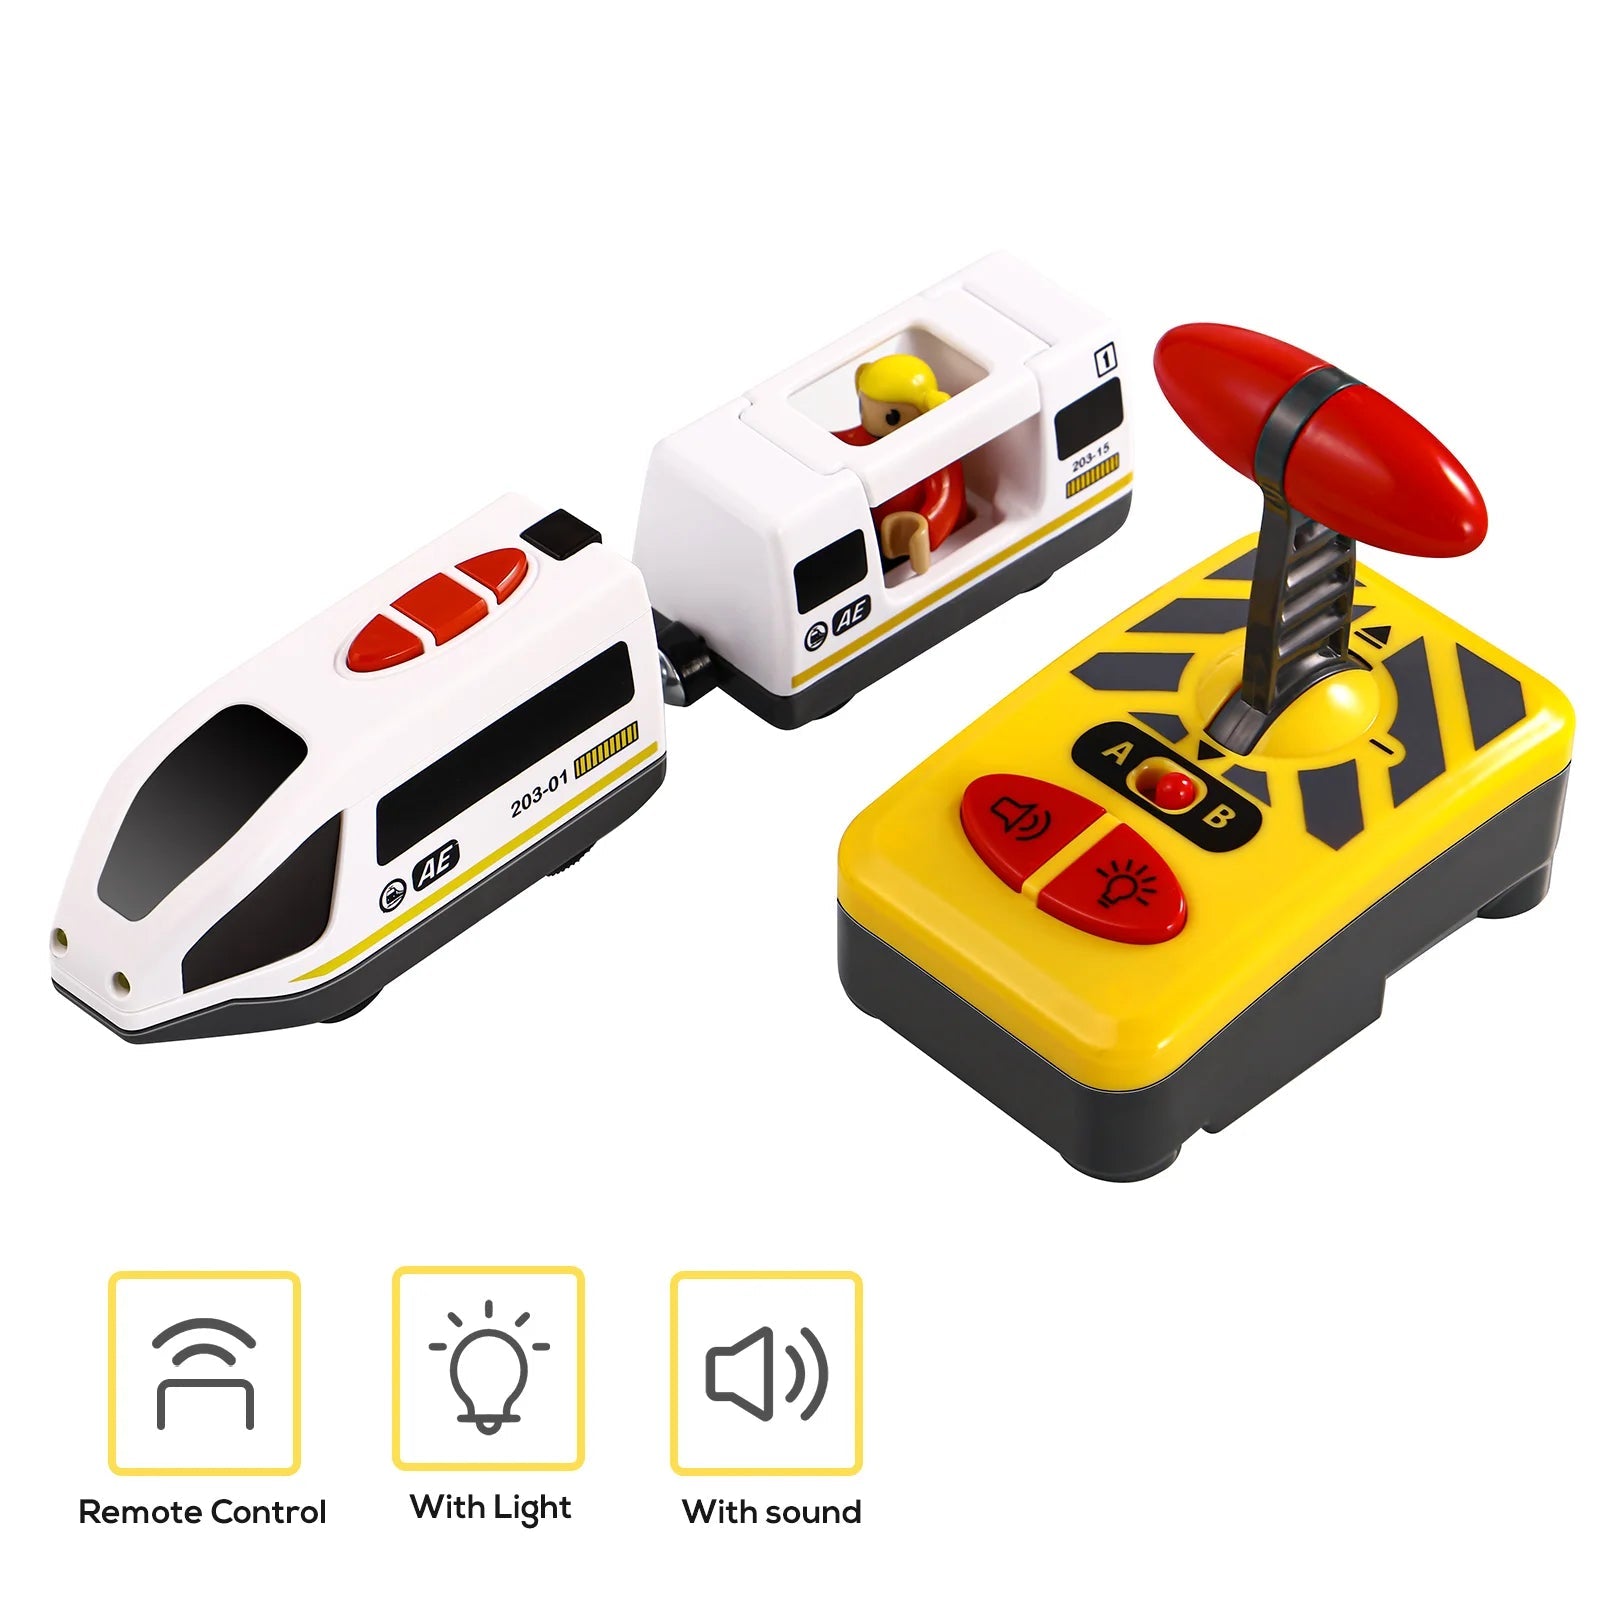 Electric Simulation Remote Control Train Model Toy for Kids with Exquisite Details - ToylandEU